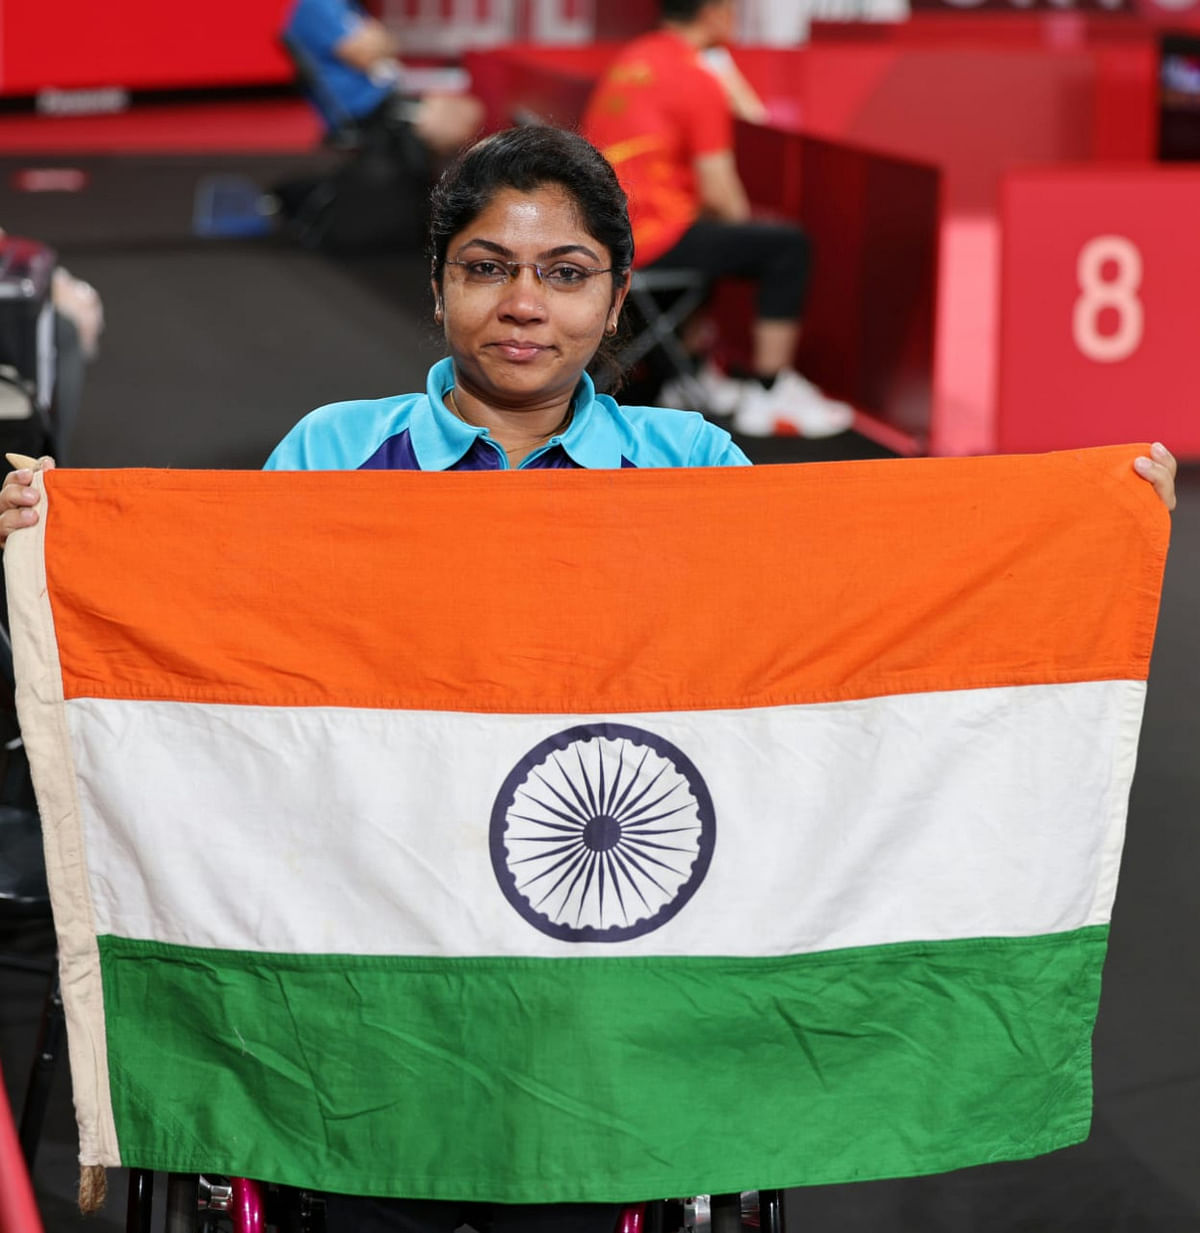 Bhavina Patel is set to become India's first medallist at the 2020 Tokyo Paralympics.